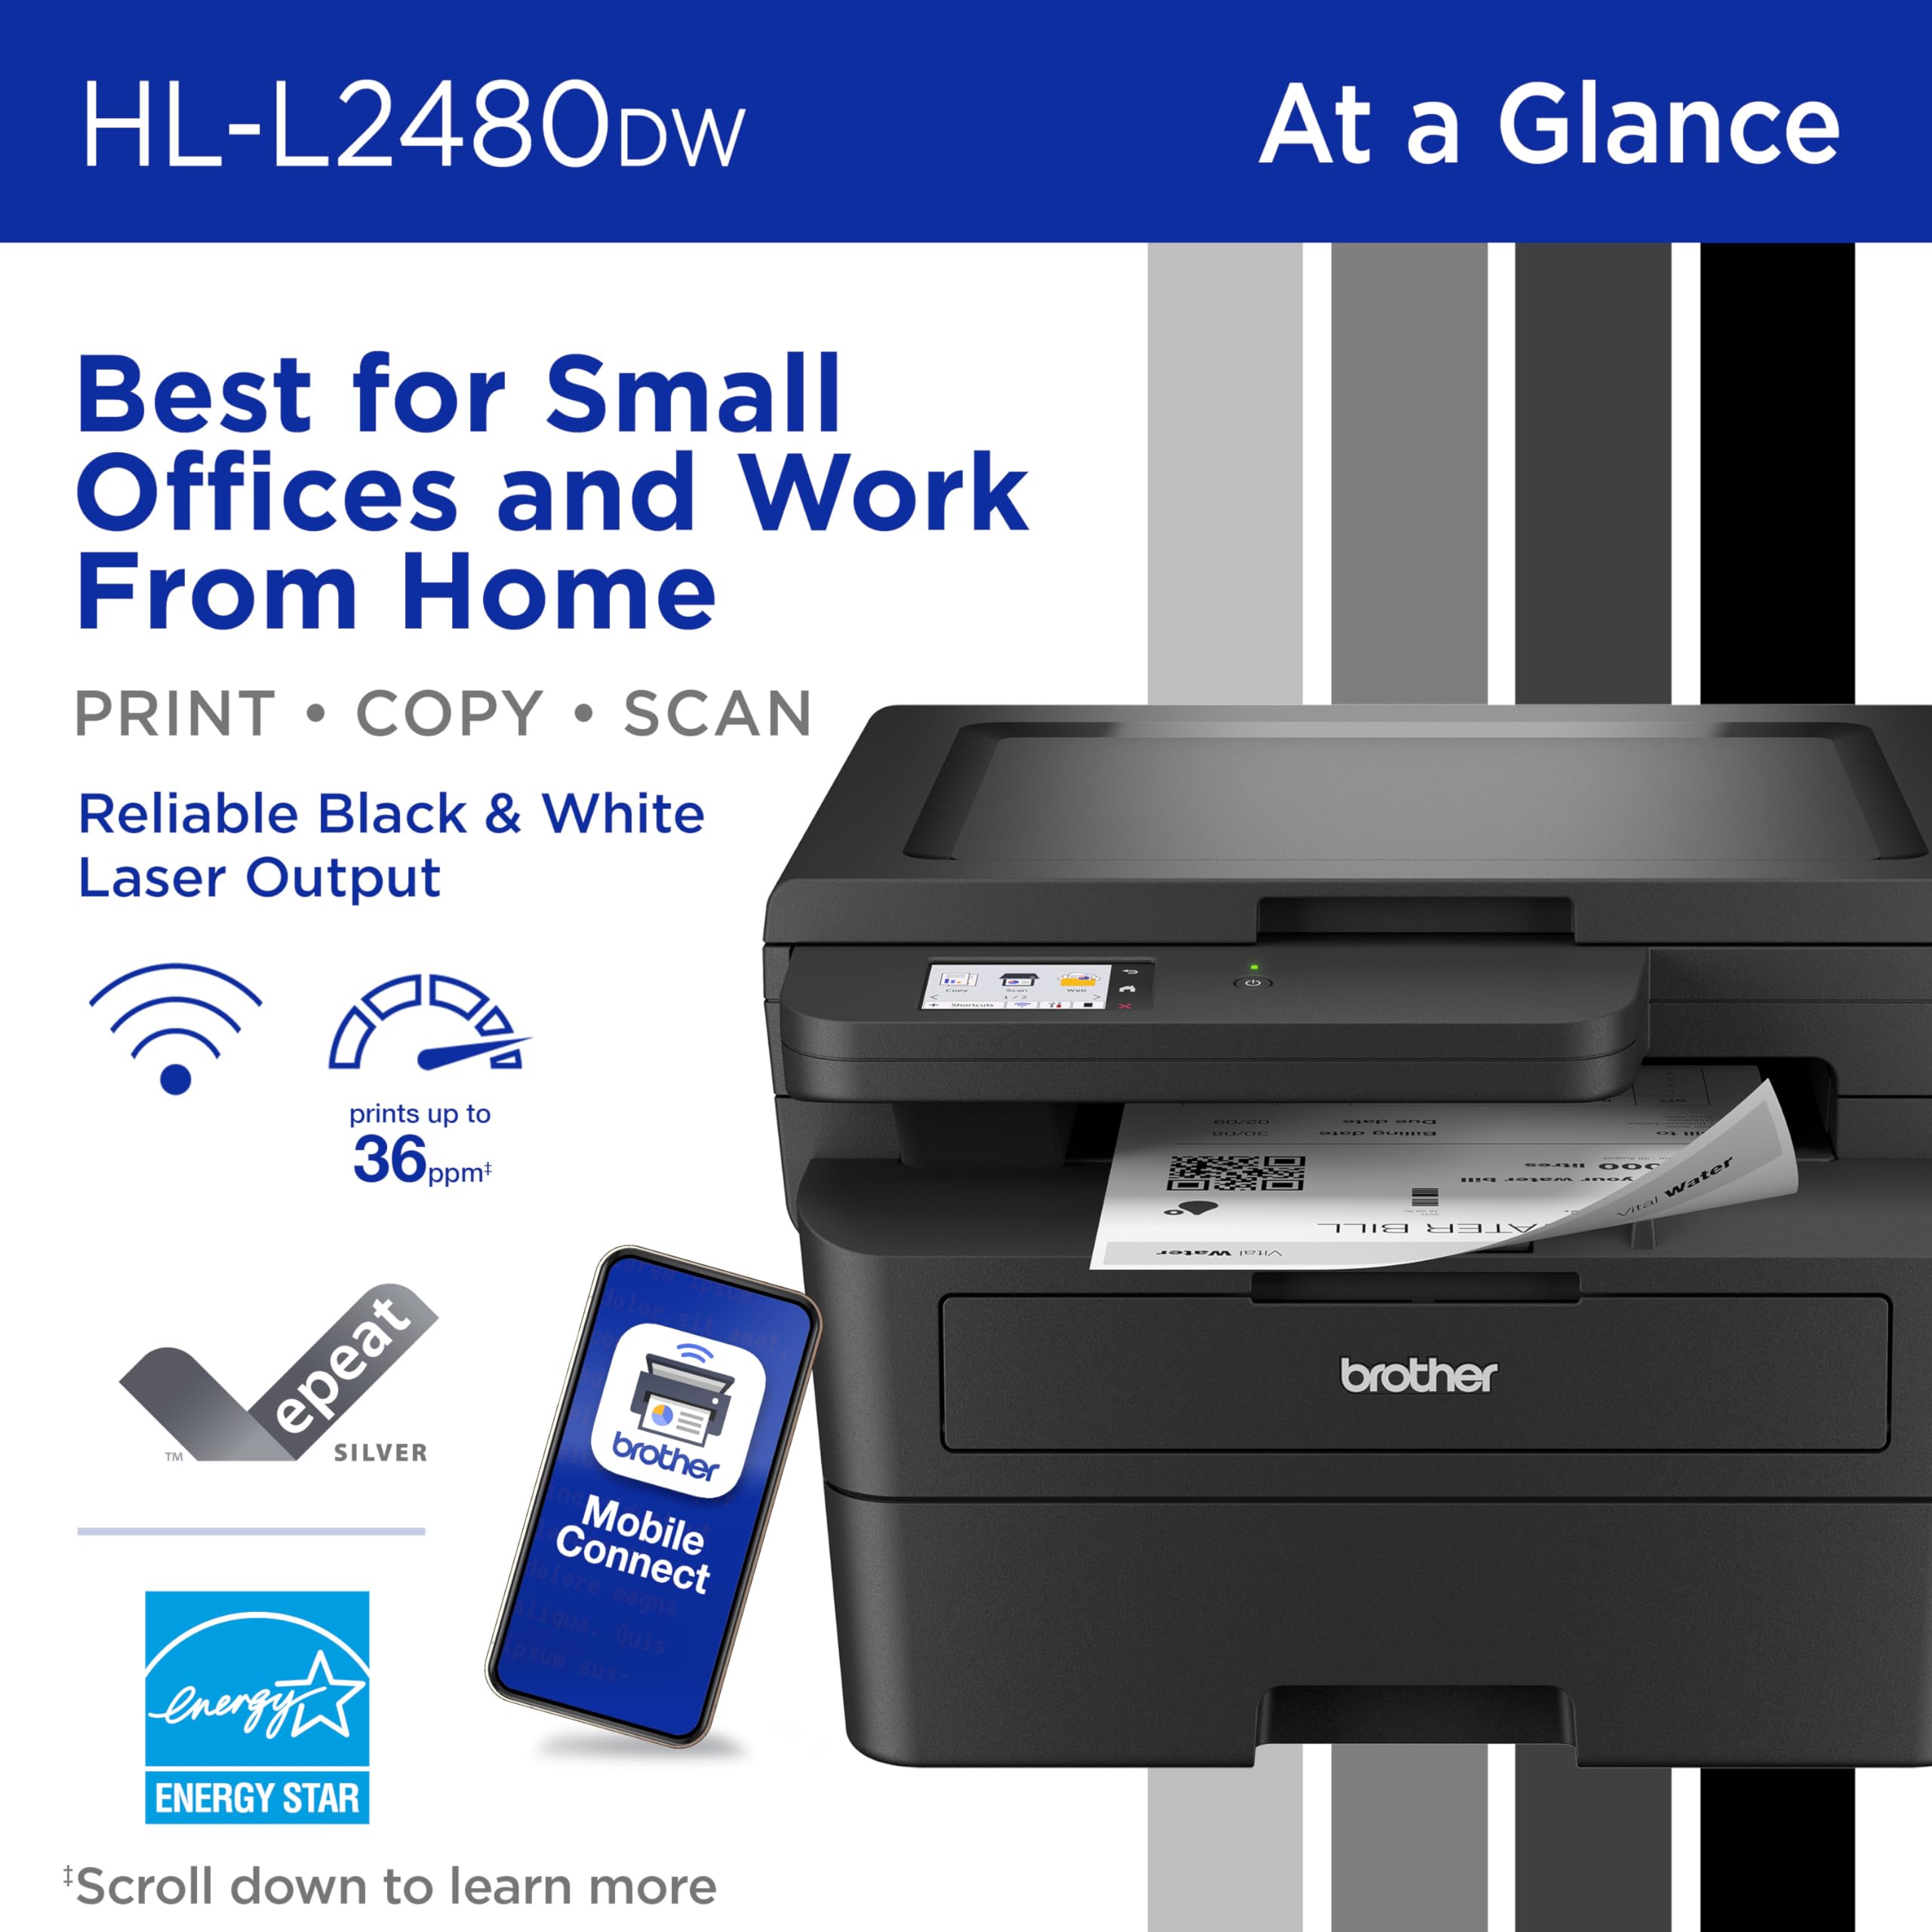 Brother HL-L2480DW Wireless Compact Monochrome Multi-Function Laser Printer with Copy and Scan, Duplex, Mobile, Black & White | Includes Refresh Subscription Trial(1), Amazon Dash Replenishment Ready